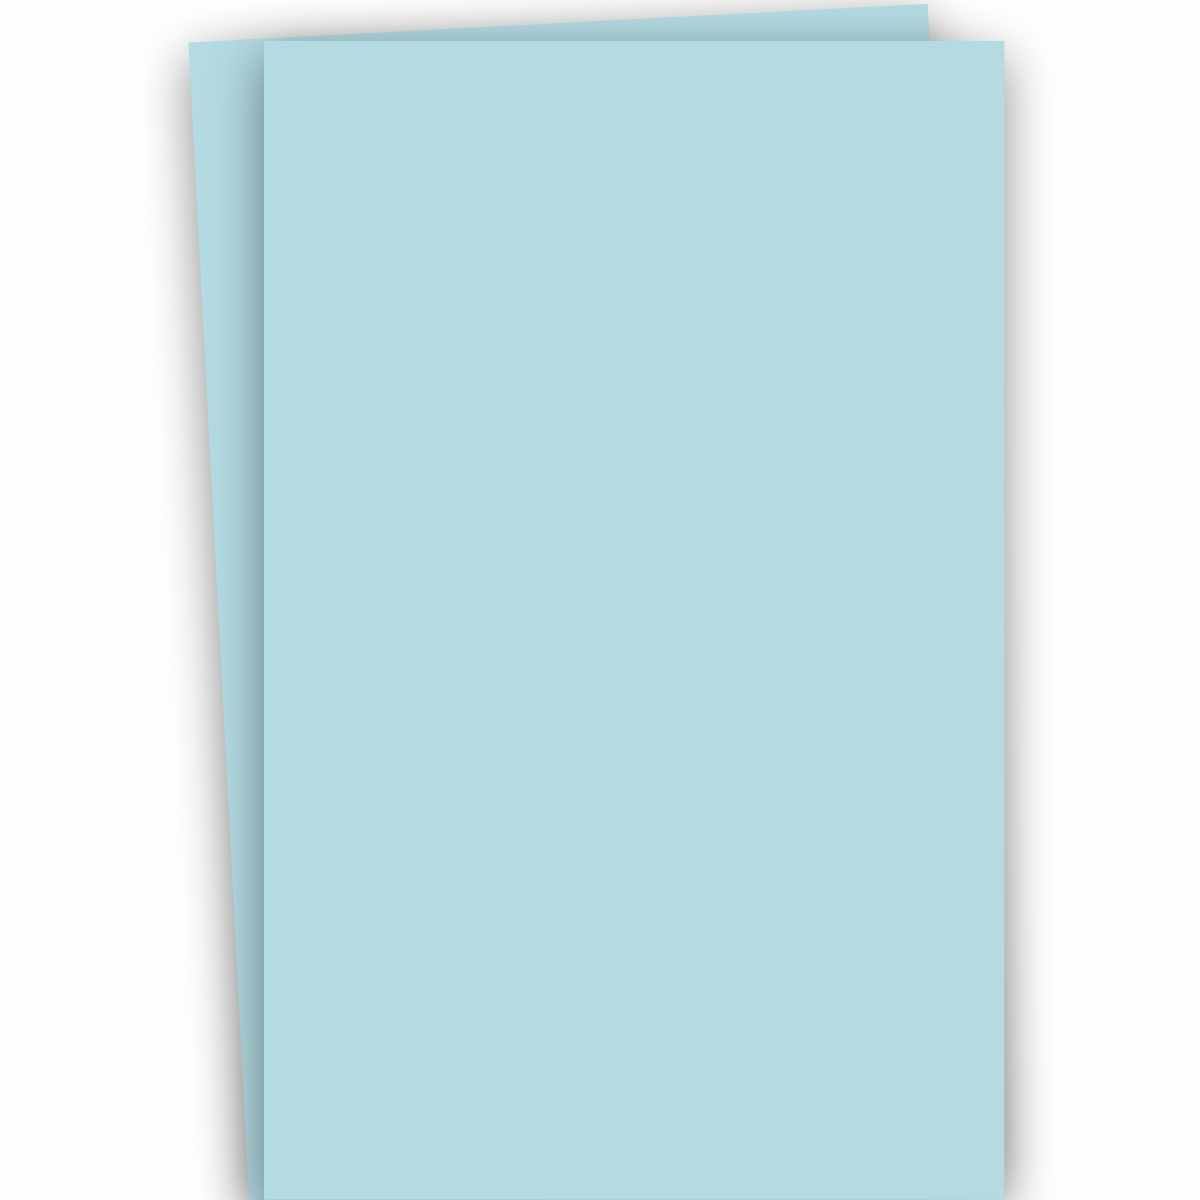 Burano BUFF (02) - 11X17 Cardstock Paper - 92lb Cover (250gsm